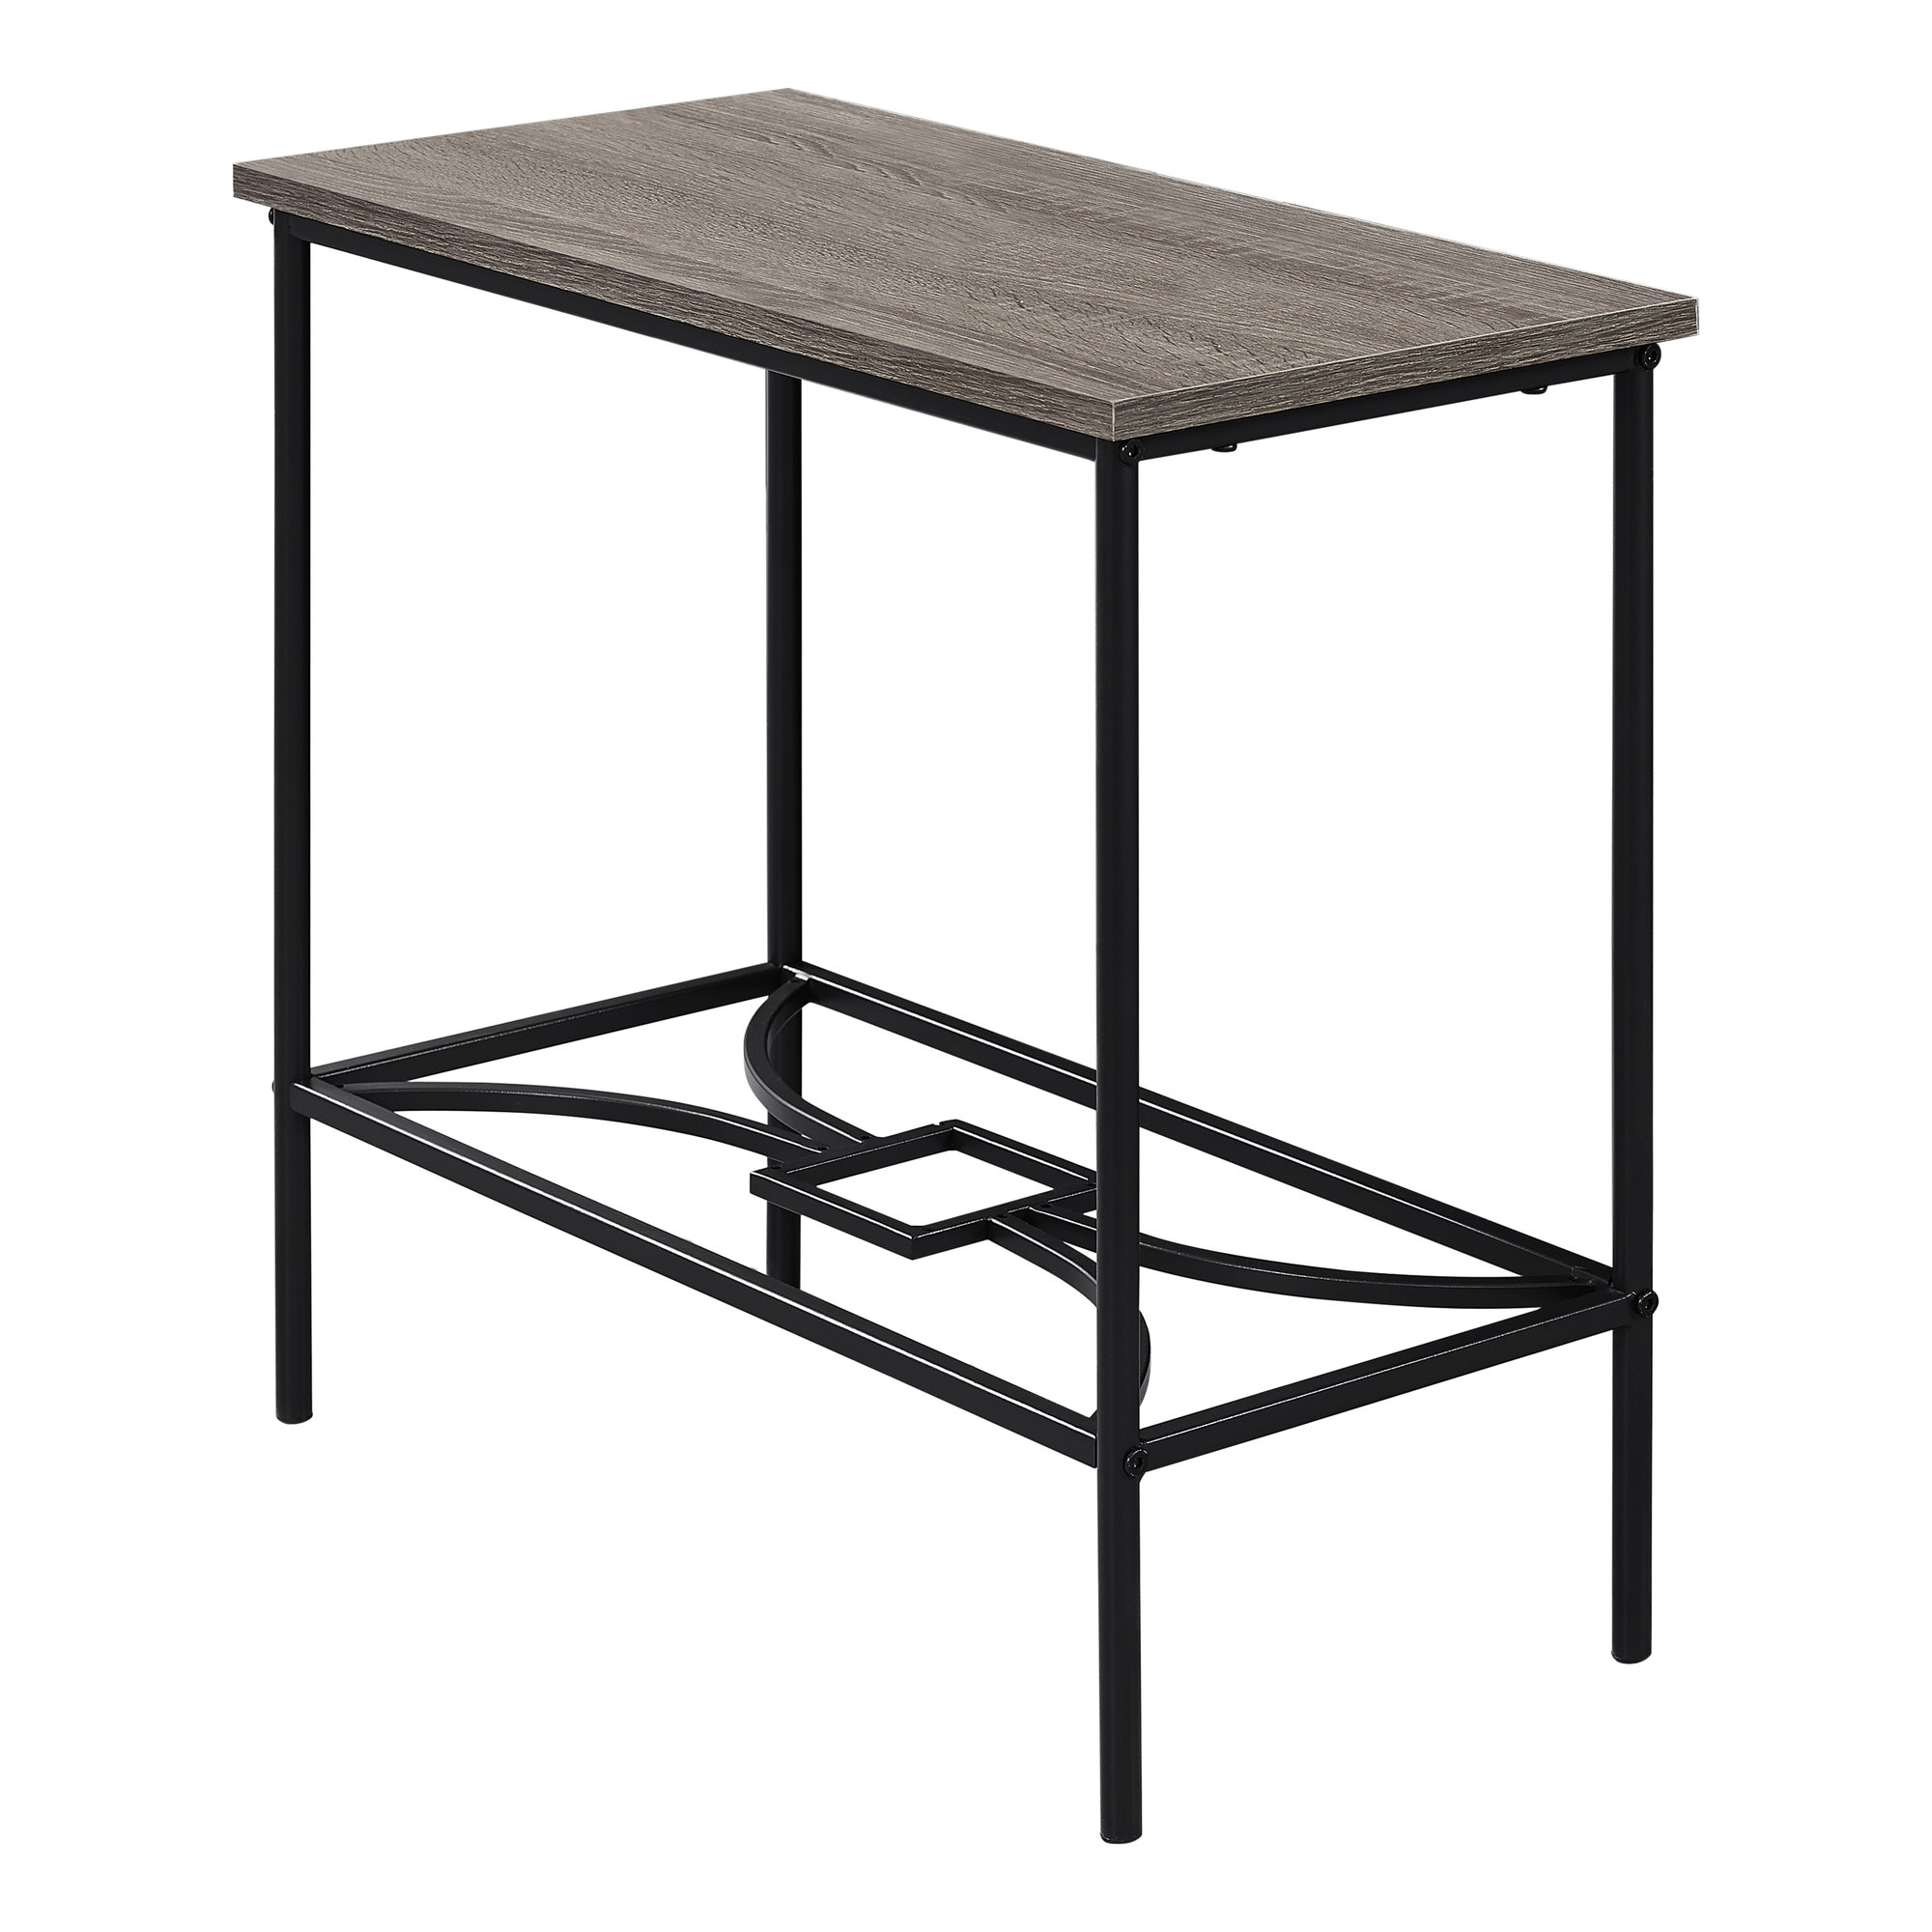 ACCENT TABLE - 22"H / DARK TAUPE / BLACK METAL